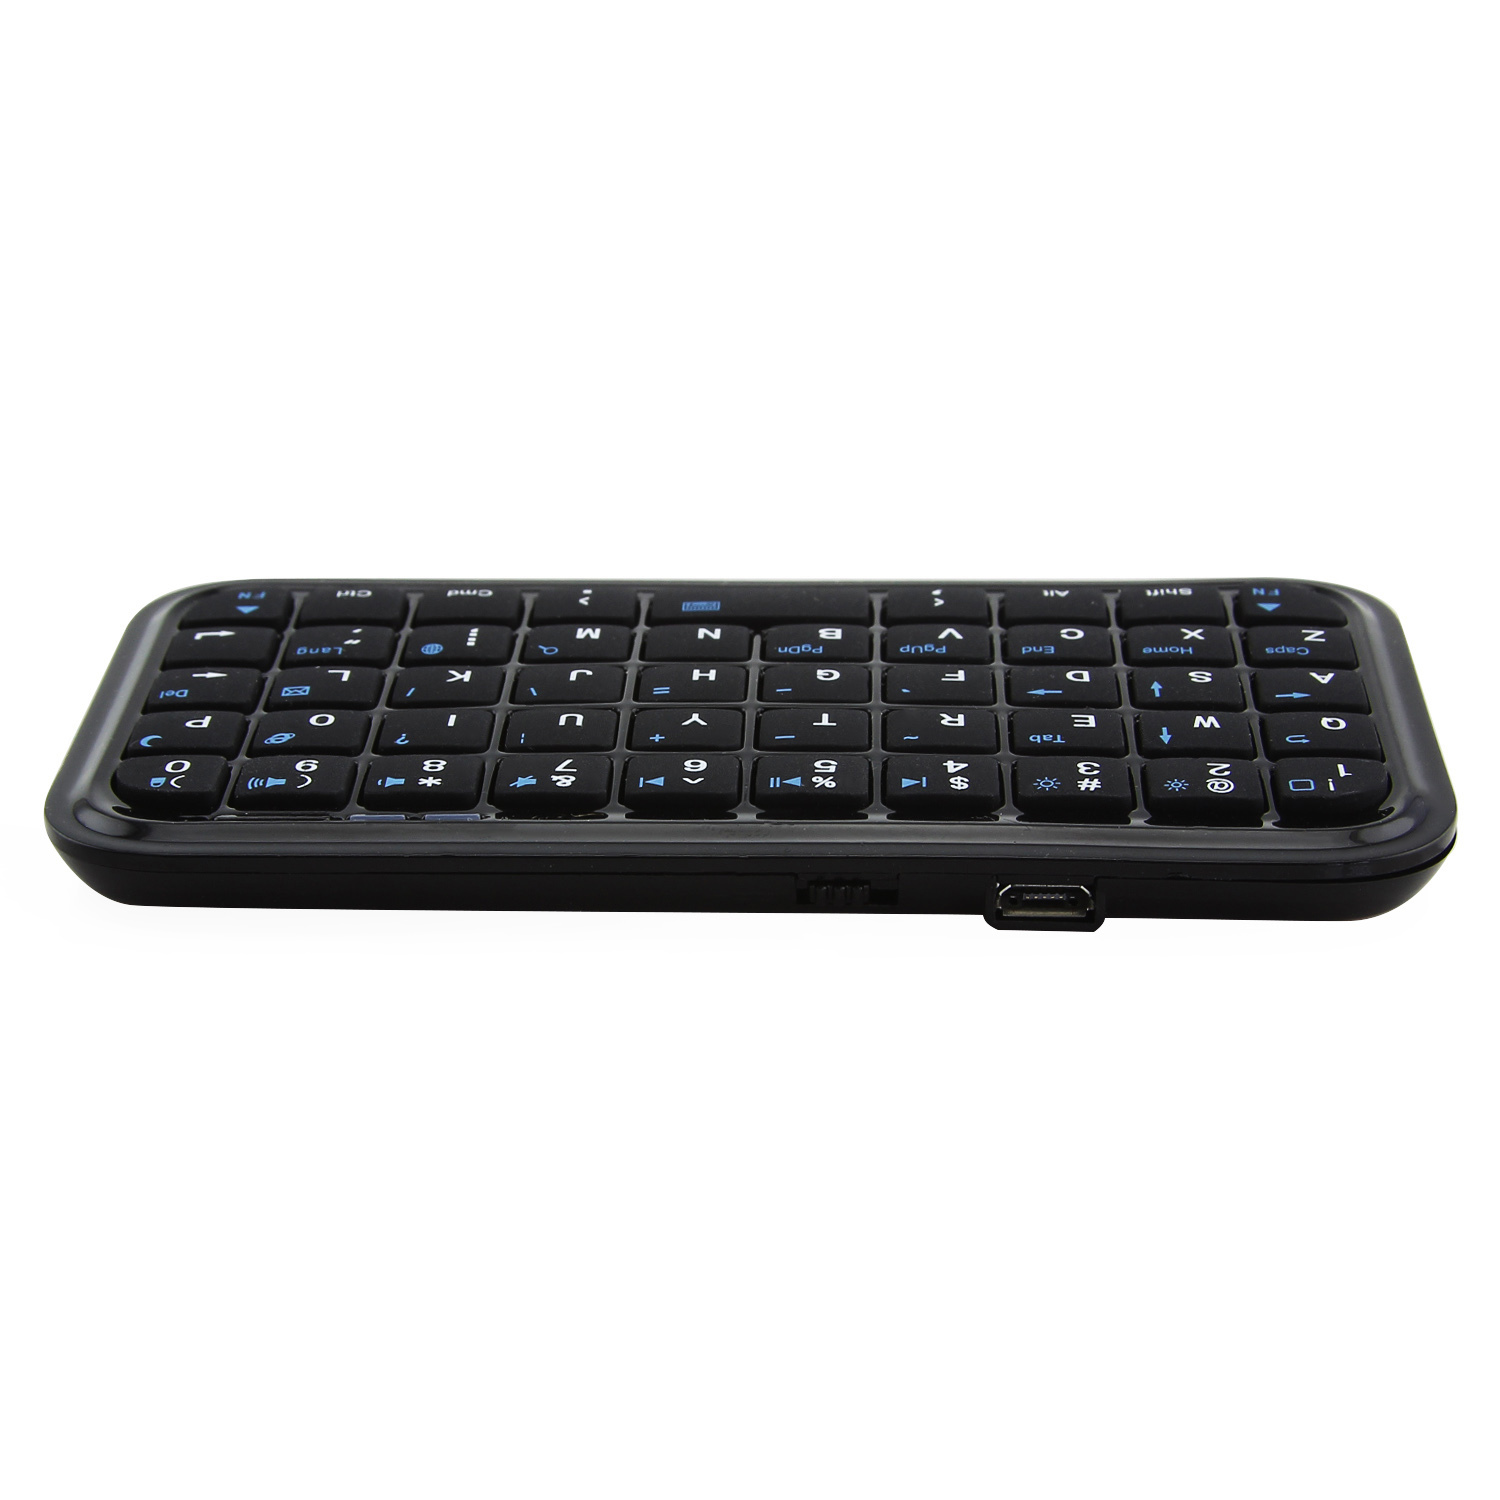 Bluetooth-Wireless-Mini-Keyboard-Slim-Black-Computer-Portable-Small-Hand-Keypad-For-iPhone-Android-Smart-Phone (3)